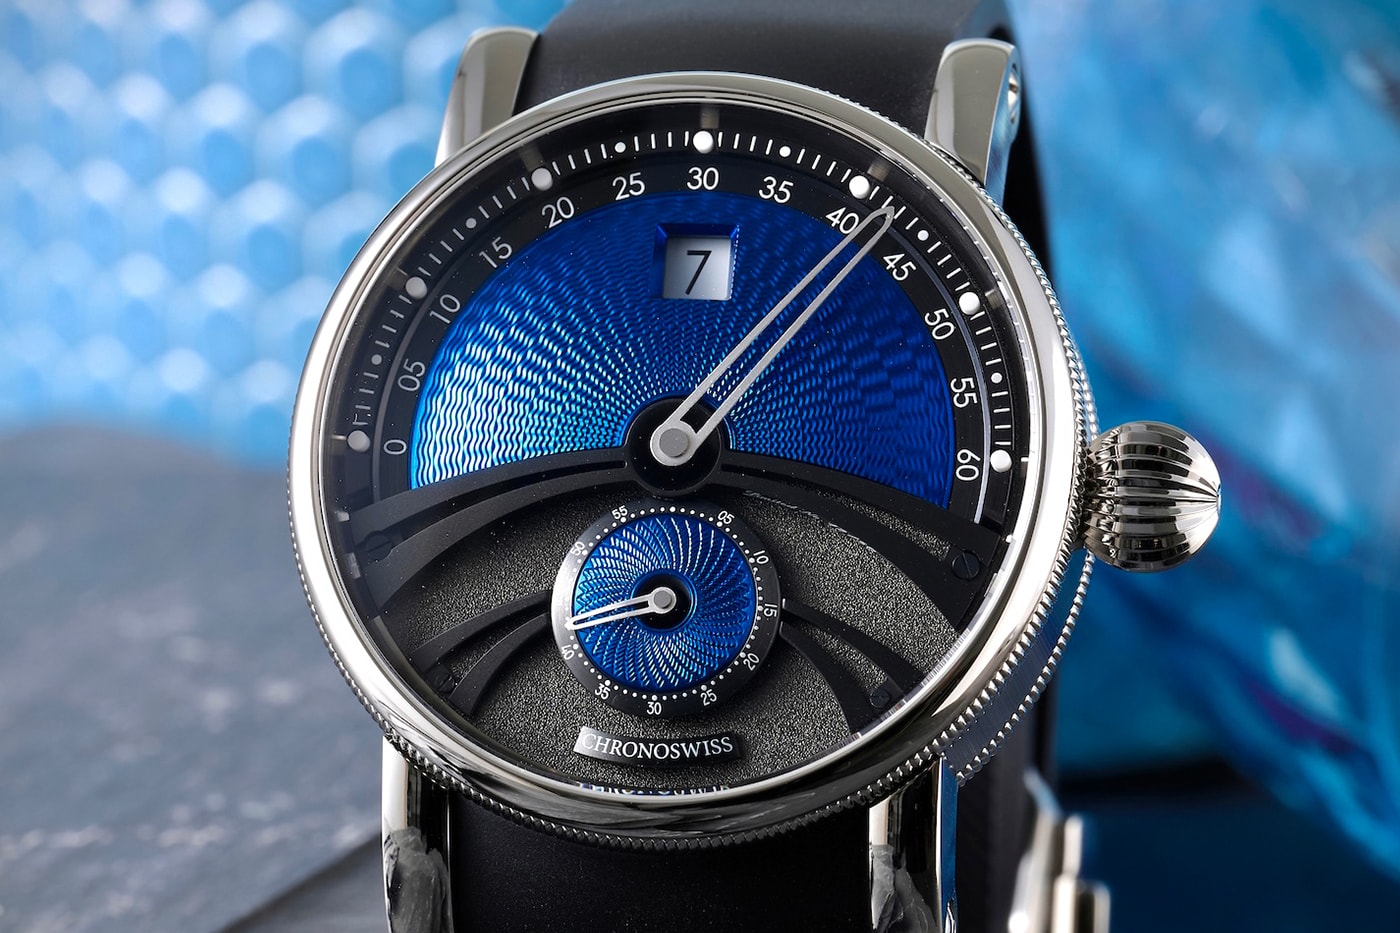 Chronoswiss Delphis Sapphire Limited Edition Info